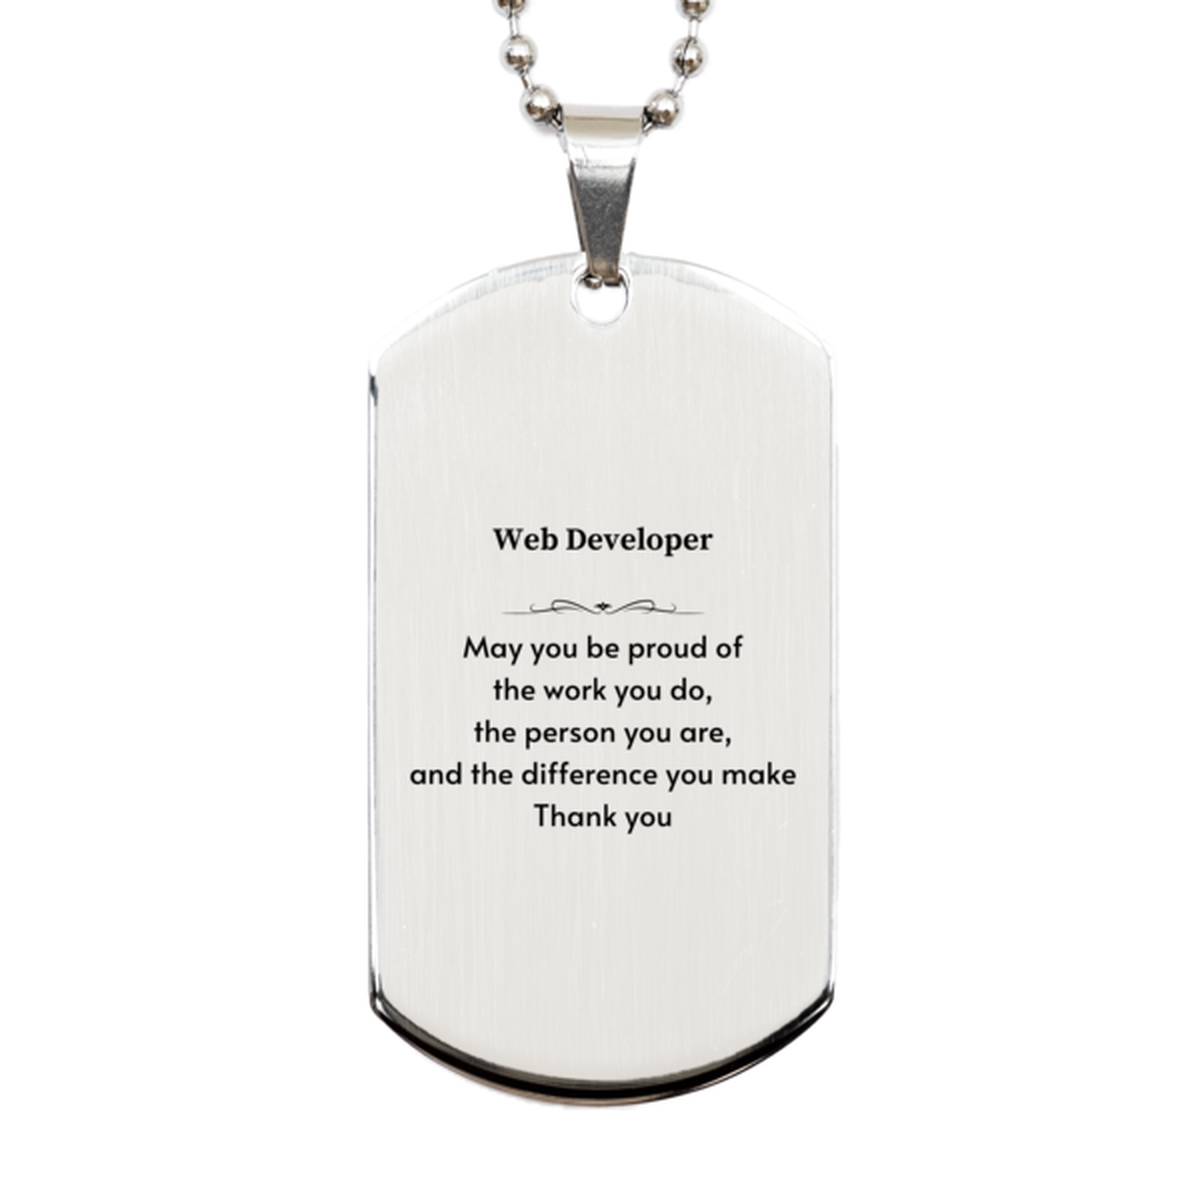 Heartwarming Silver Dog Tag Retirement Coworkers Gifts for Web Developer, Web Developer May You be proud of the work you do, the person you are Gifts for Boss Men Women Friends